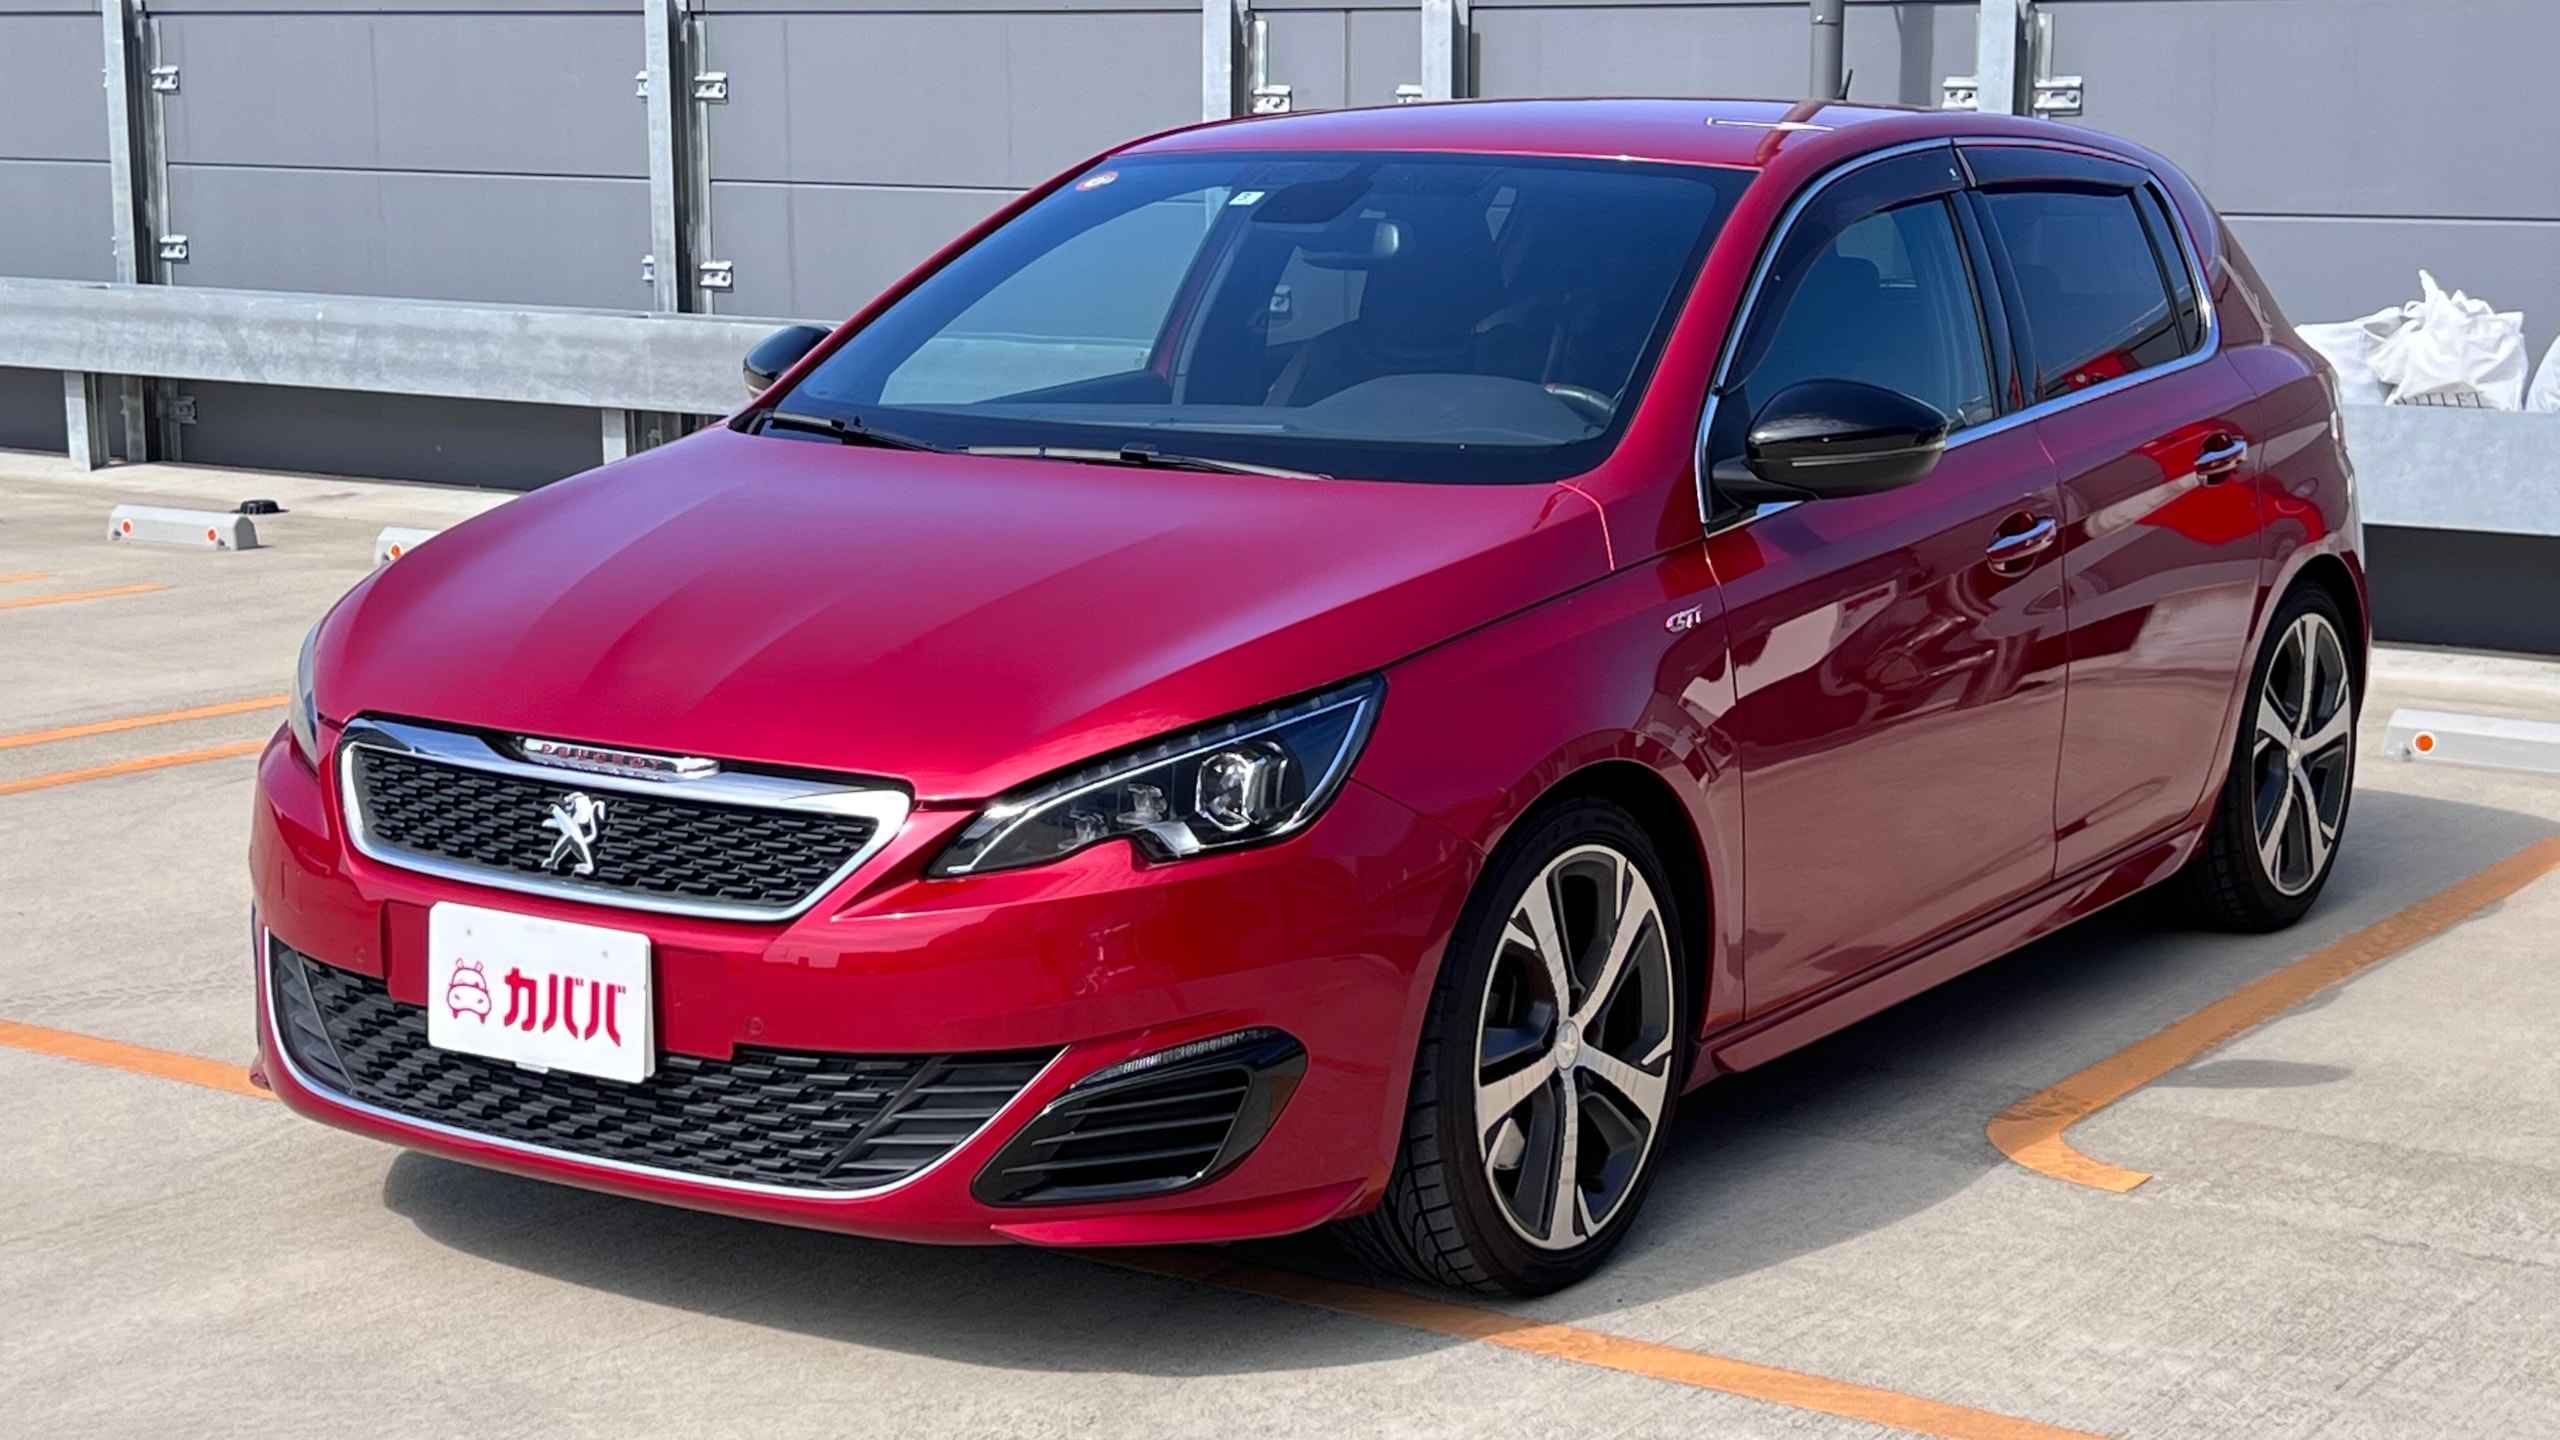 308 GTi 250 by プジョースポール(プジョー)2016年式 155万円の